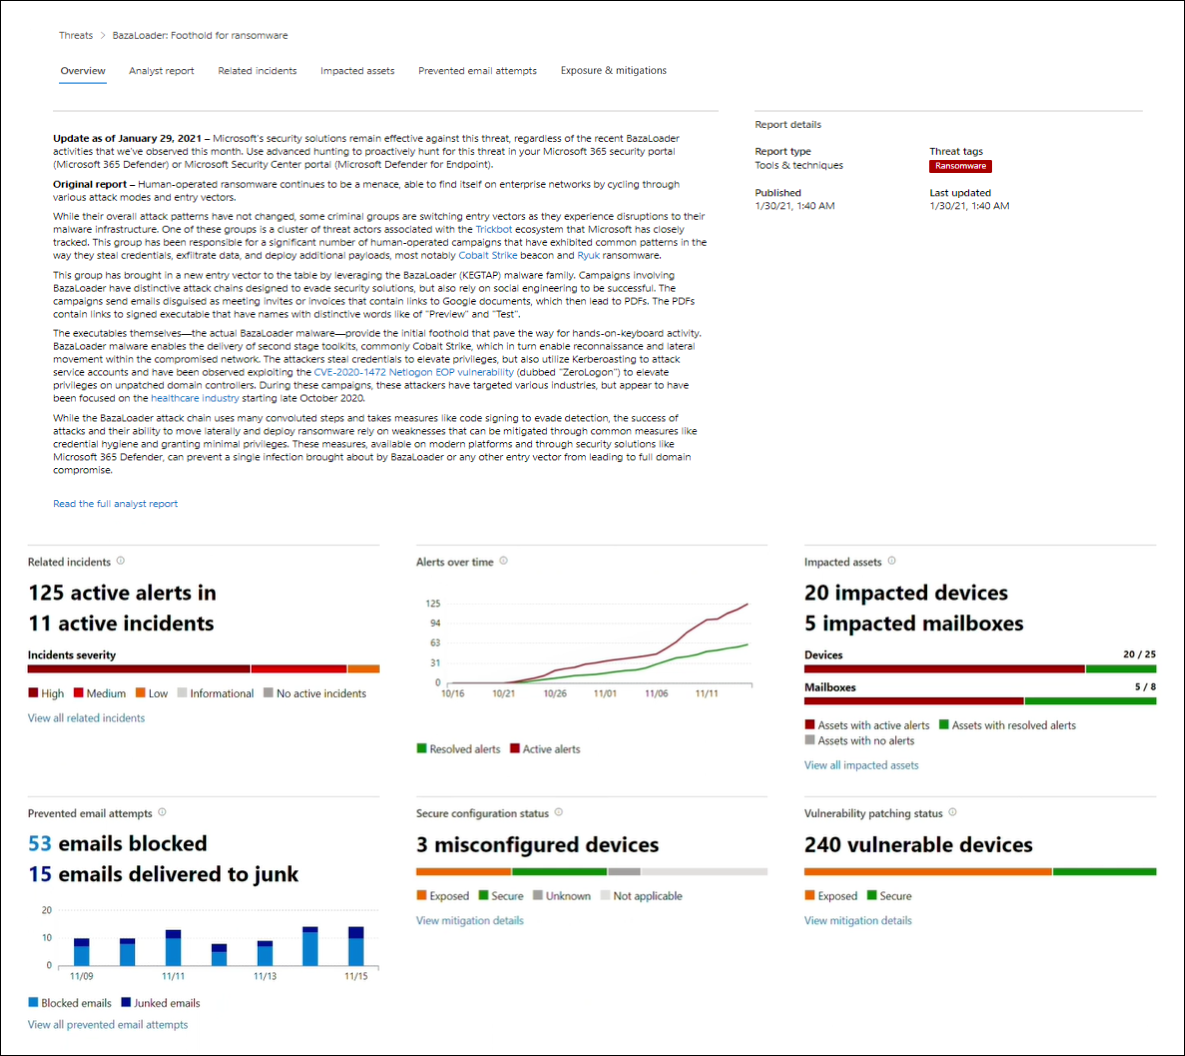 Screenshot of the overview section of the threat analytics report.